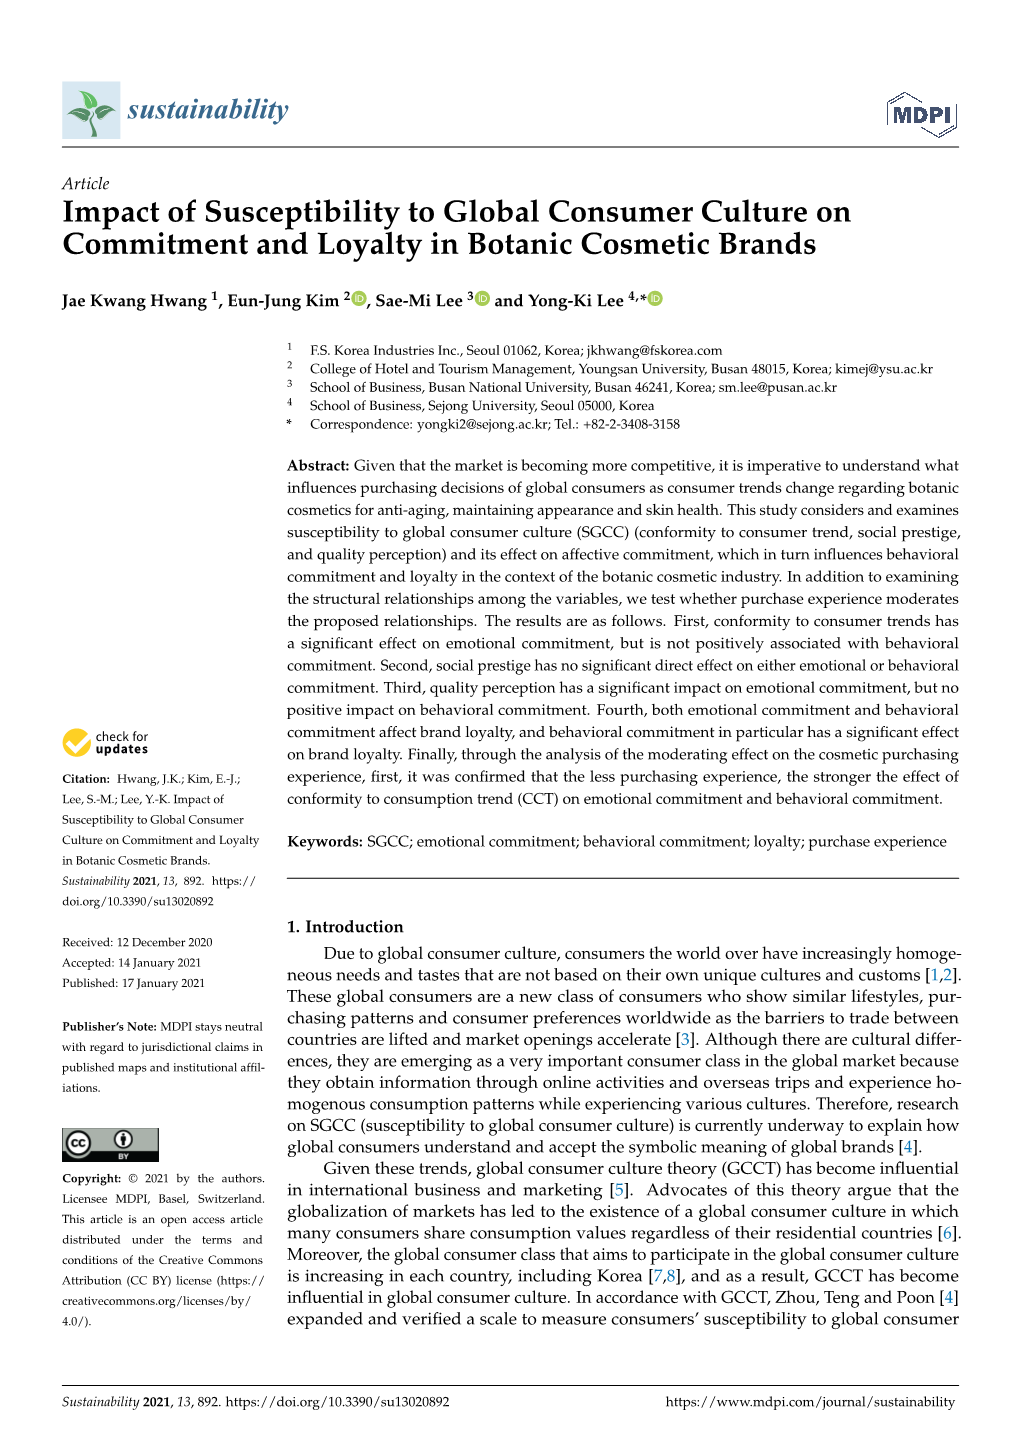 Impact of Susceptibility to Global Consumer Culture on Commitment and Loyalty in Botanic Cosmetic Brands